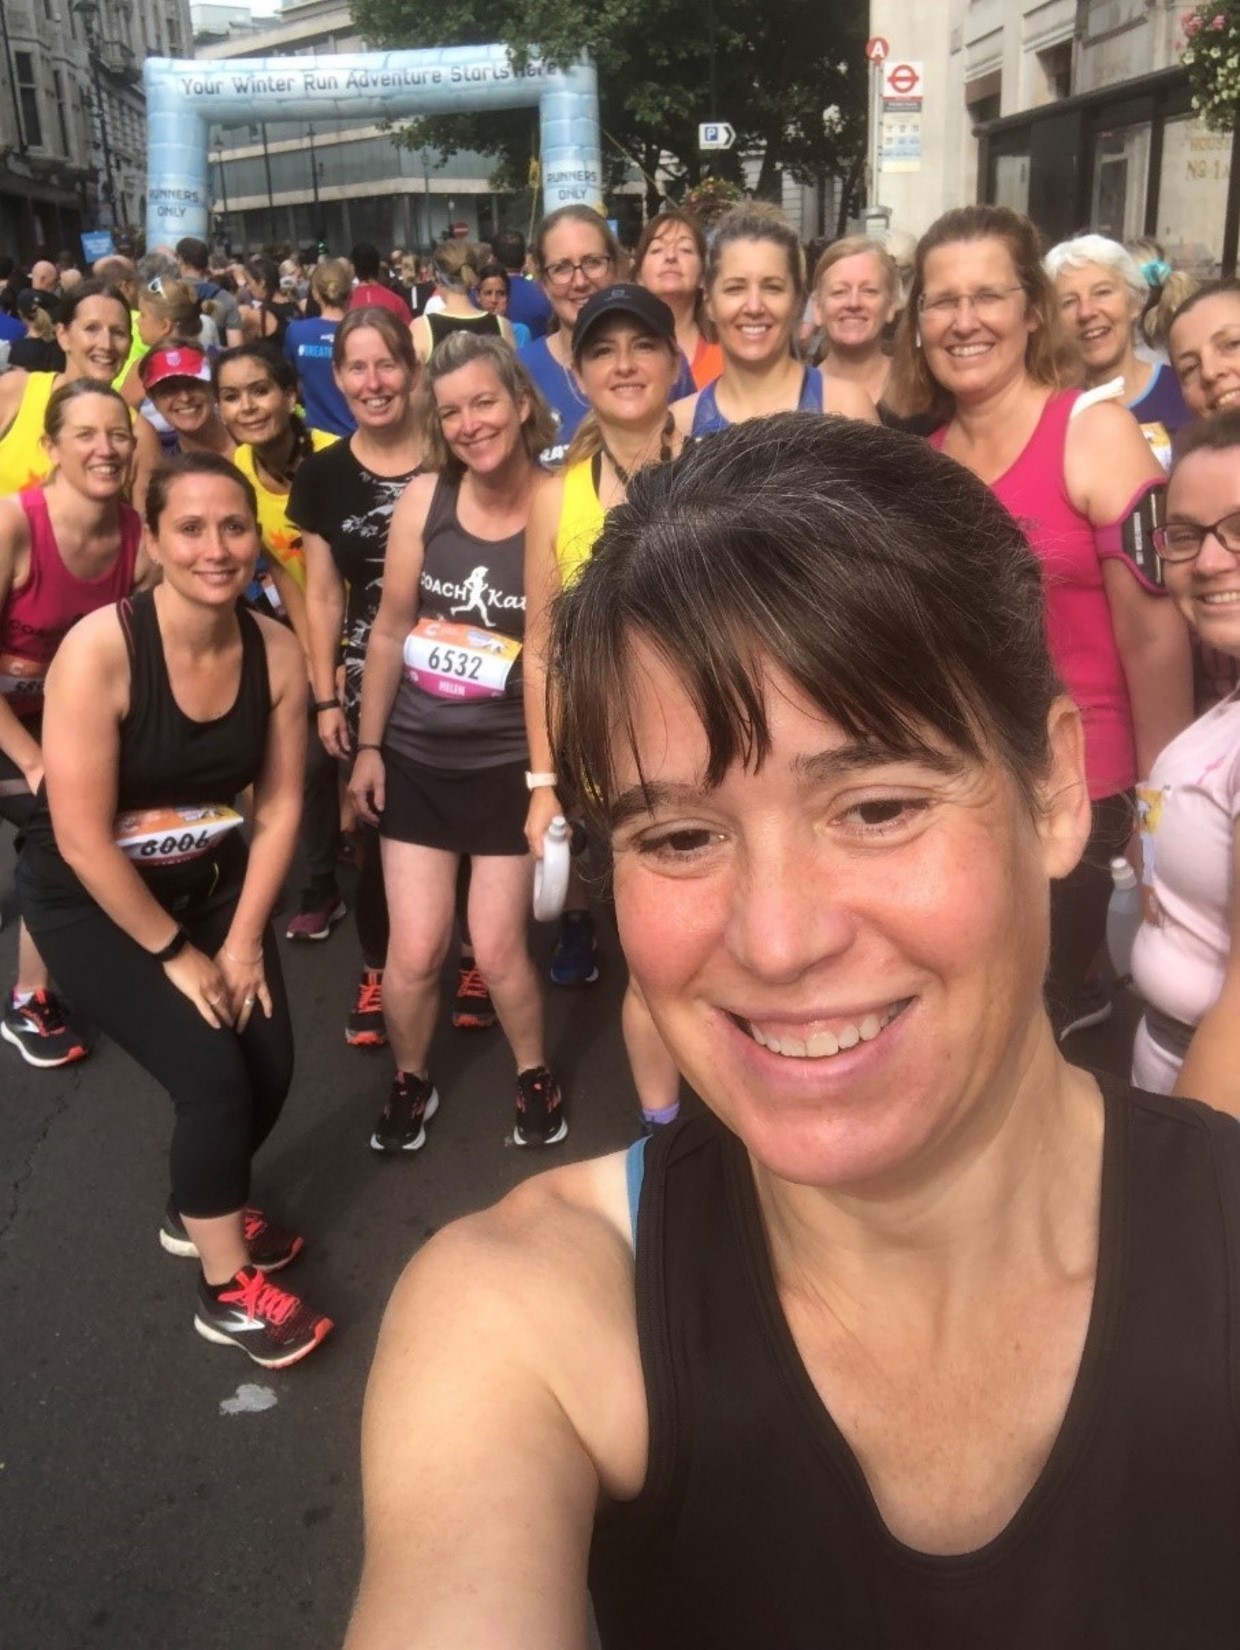 A selfie of a group of runners during a road running race